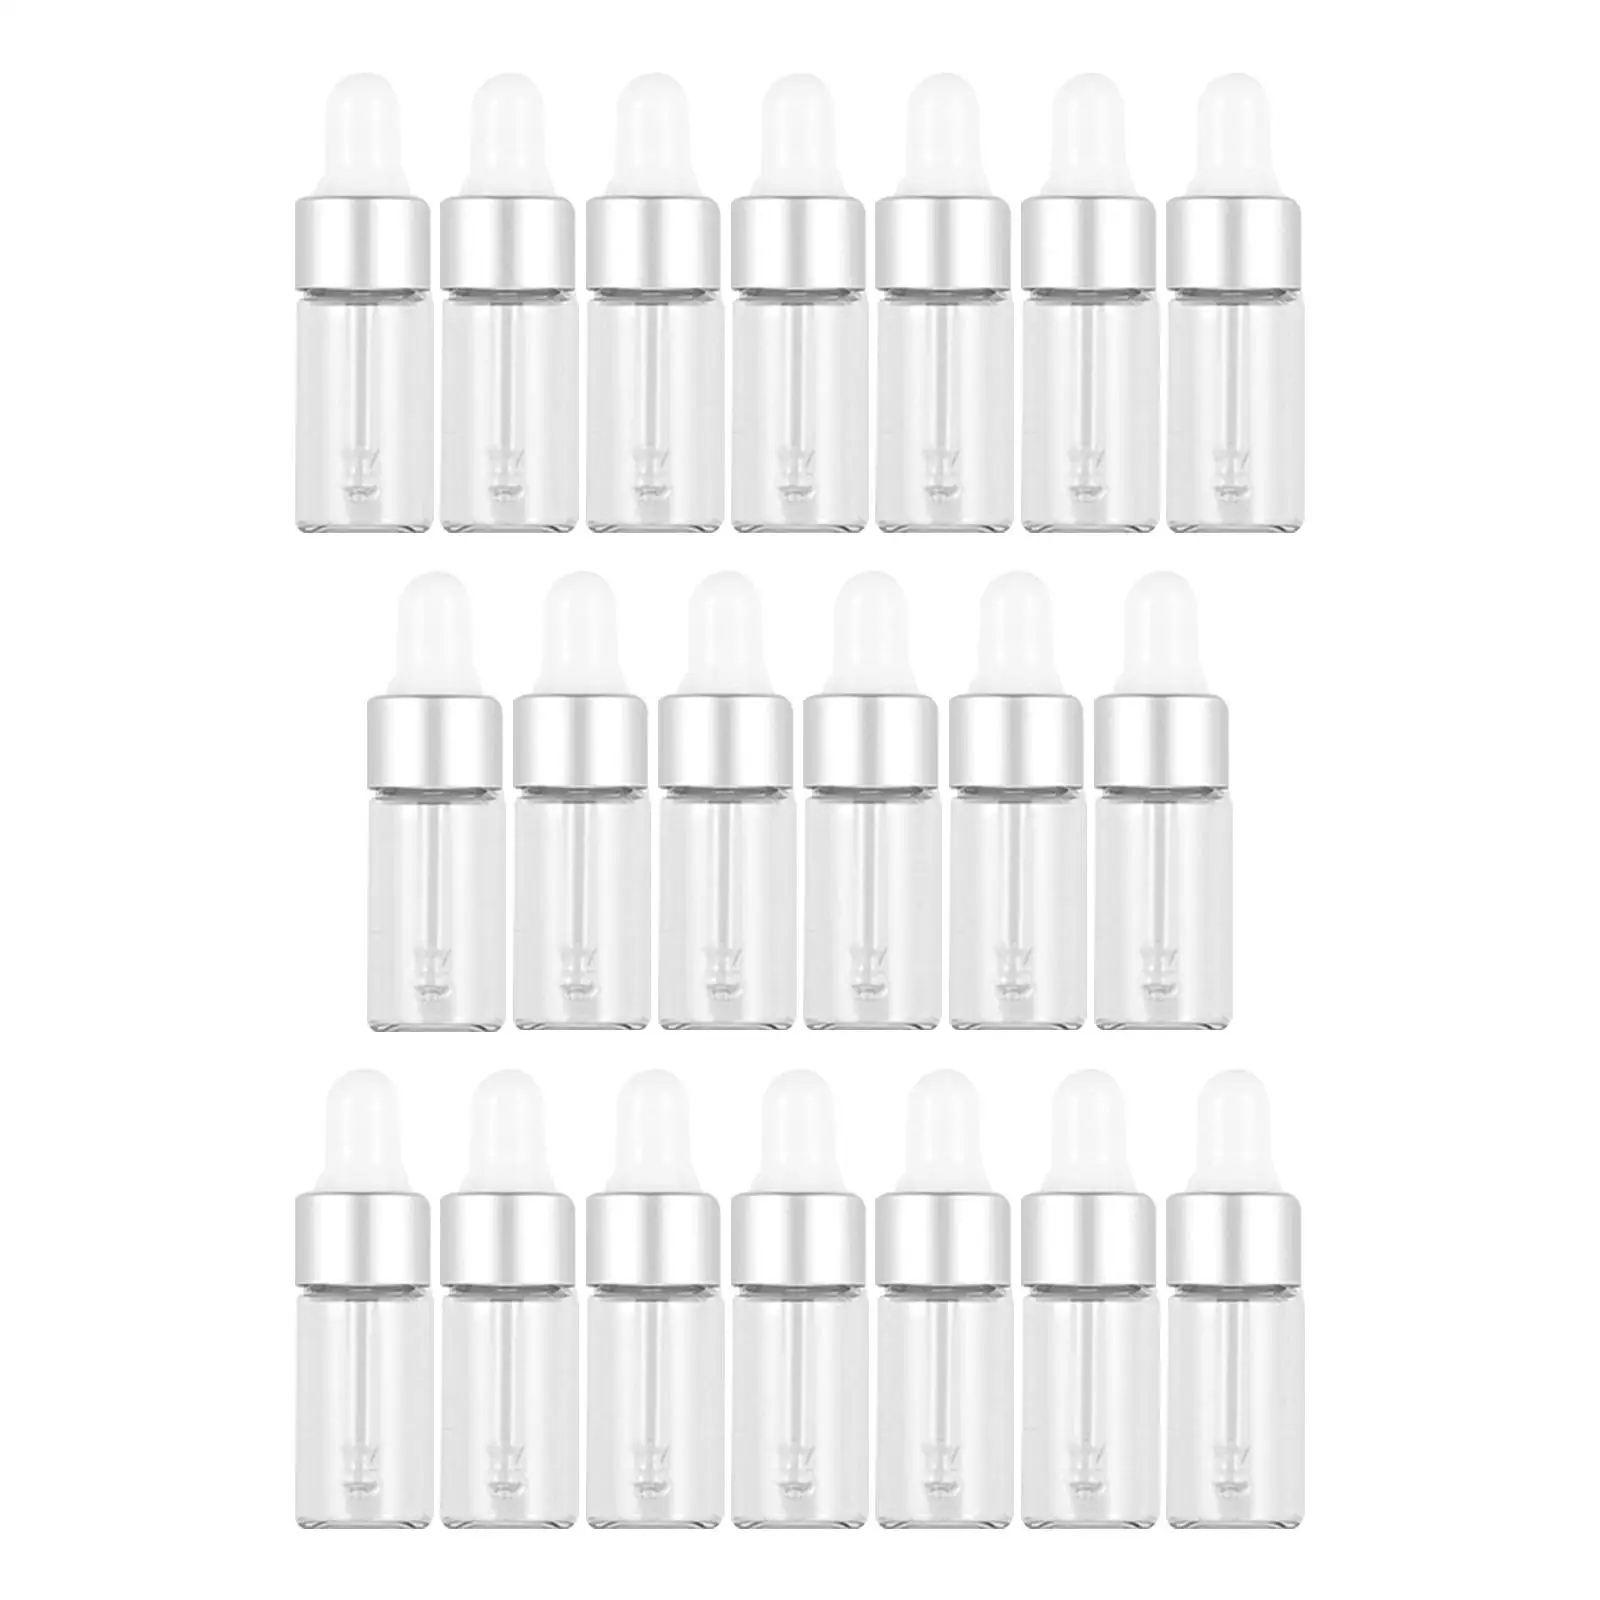 20 Pieces glass Dropper Bottles with Glass Eye Droppers Containers Travel Bottles Vials for Body Oils Perfume Oils Liquids